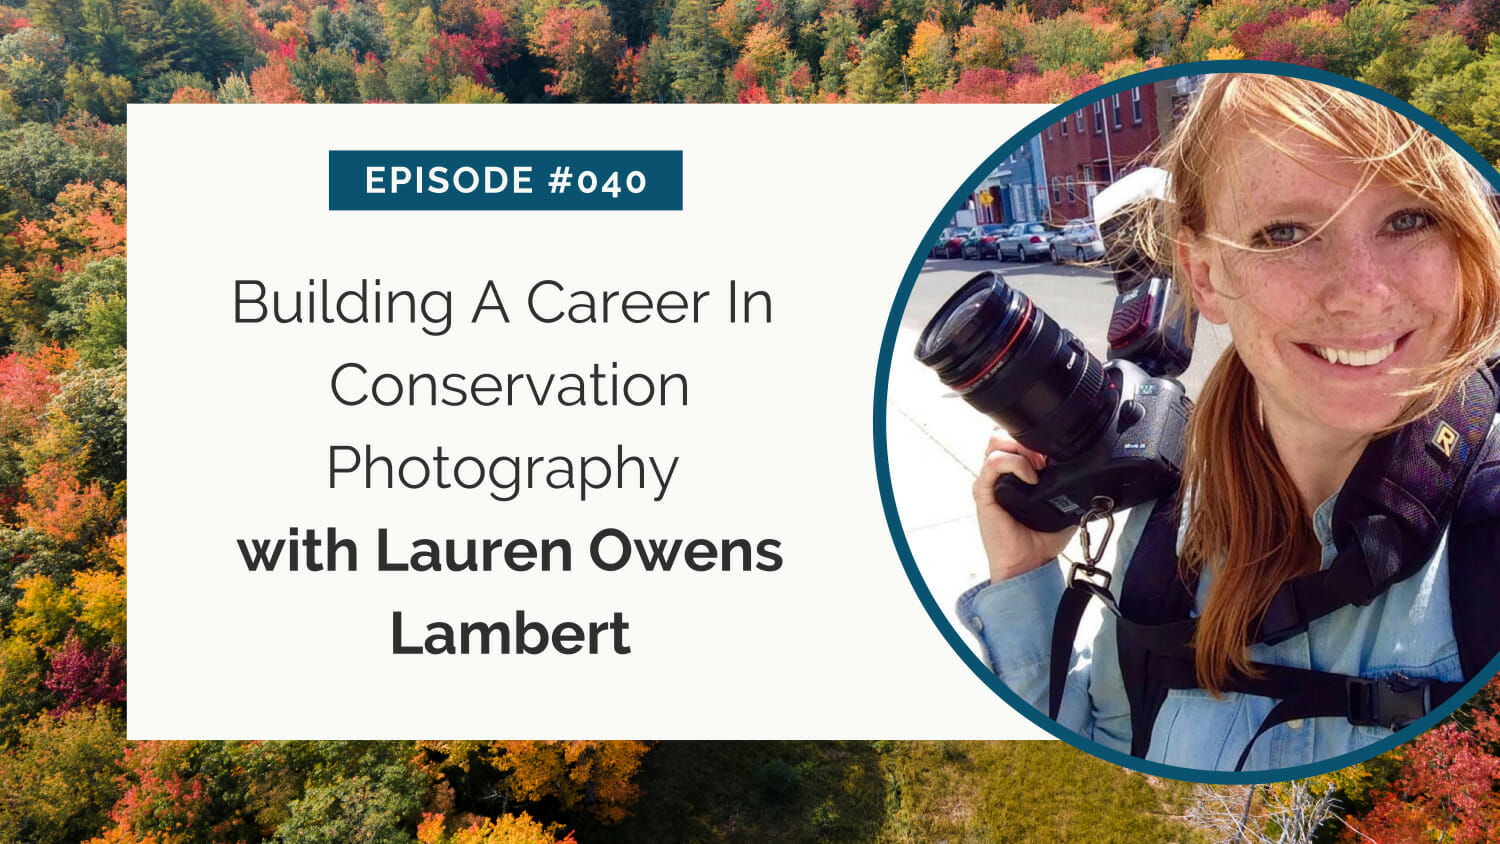 Promotional graphic for episode #040 featuring an interview with lauren owens lambert on building a career in conservation photography.